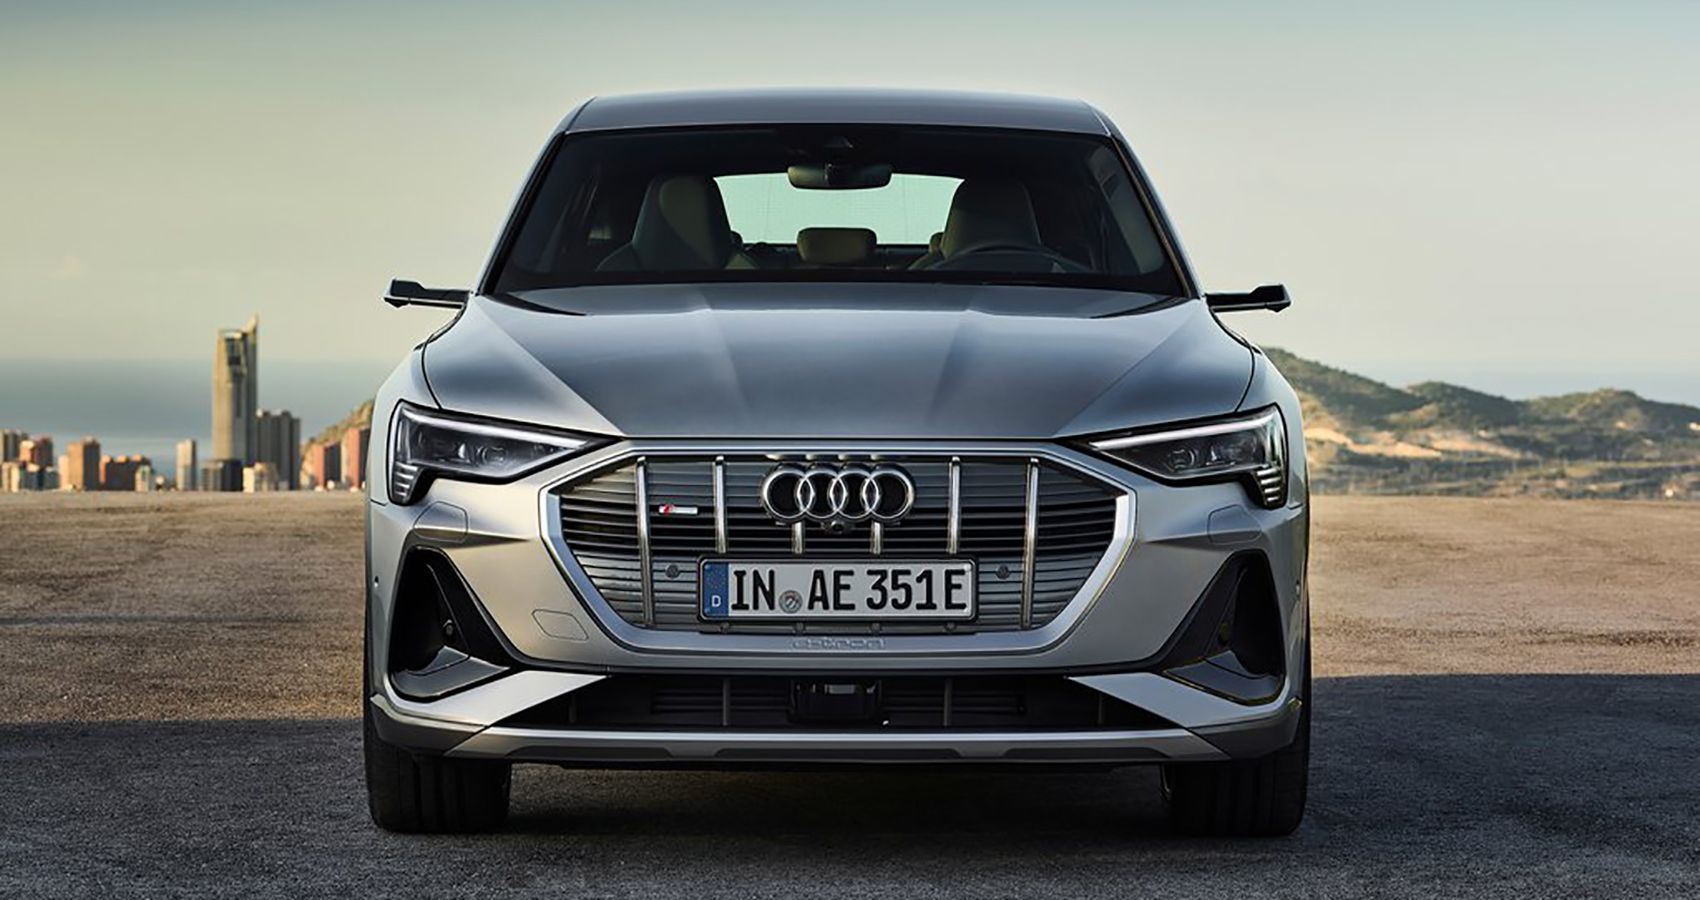 These Are Our Favorite Features Of The Audi E-Tron Sportback